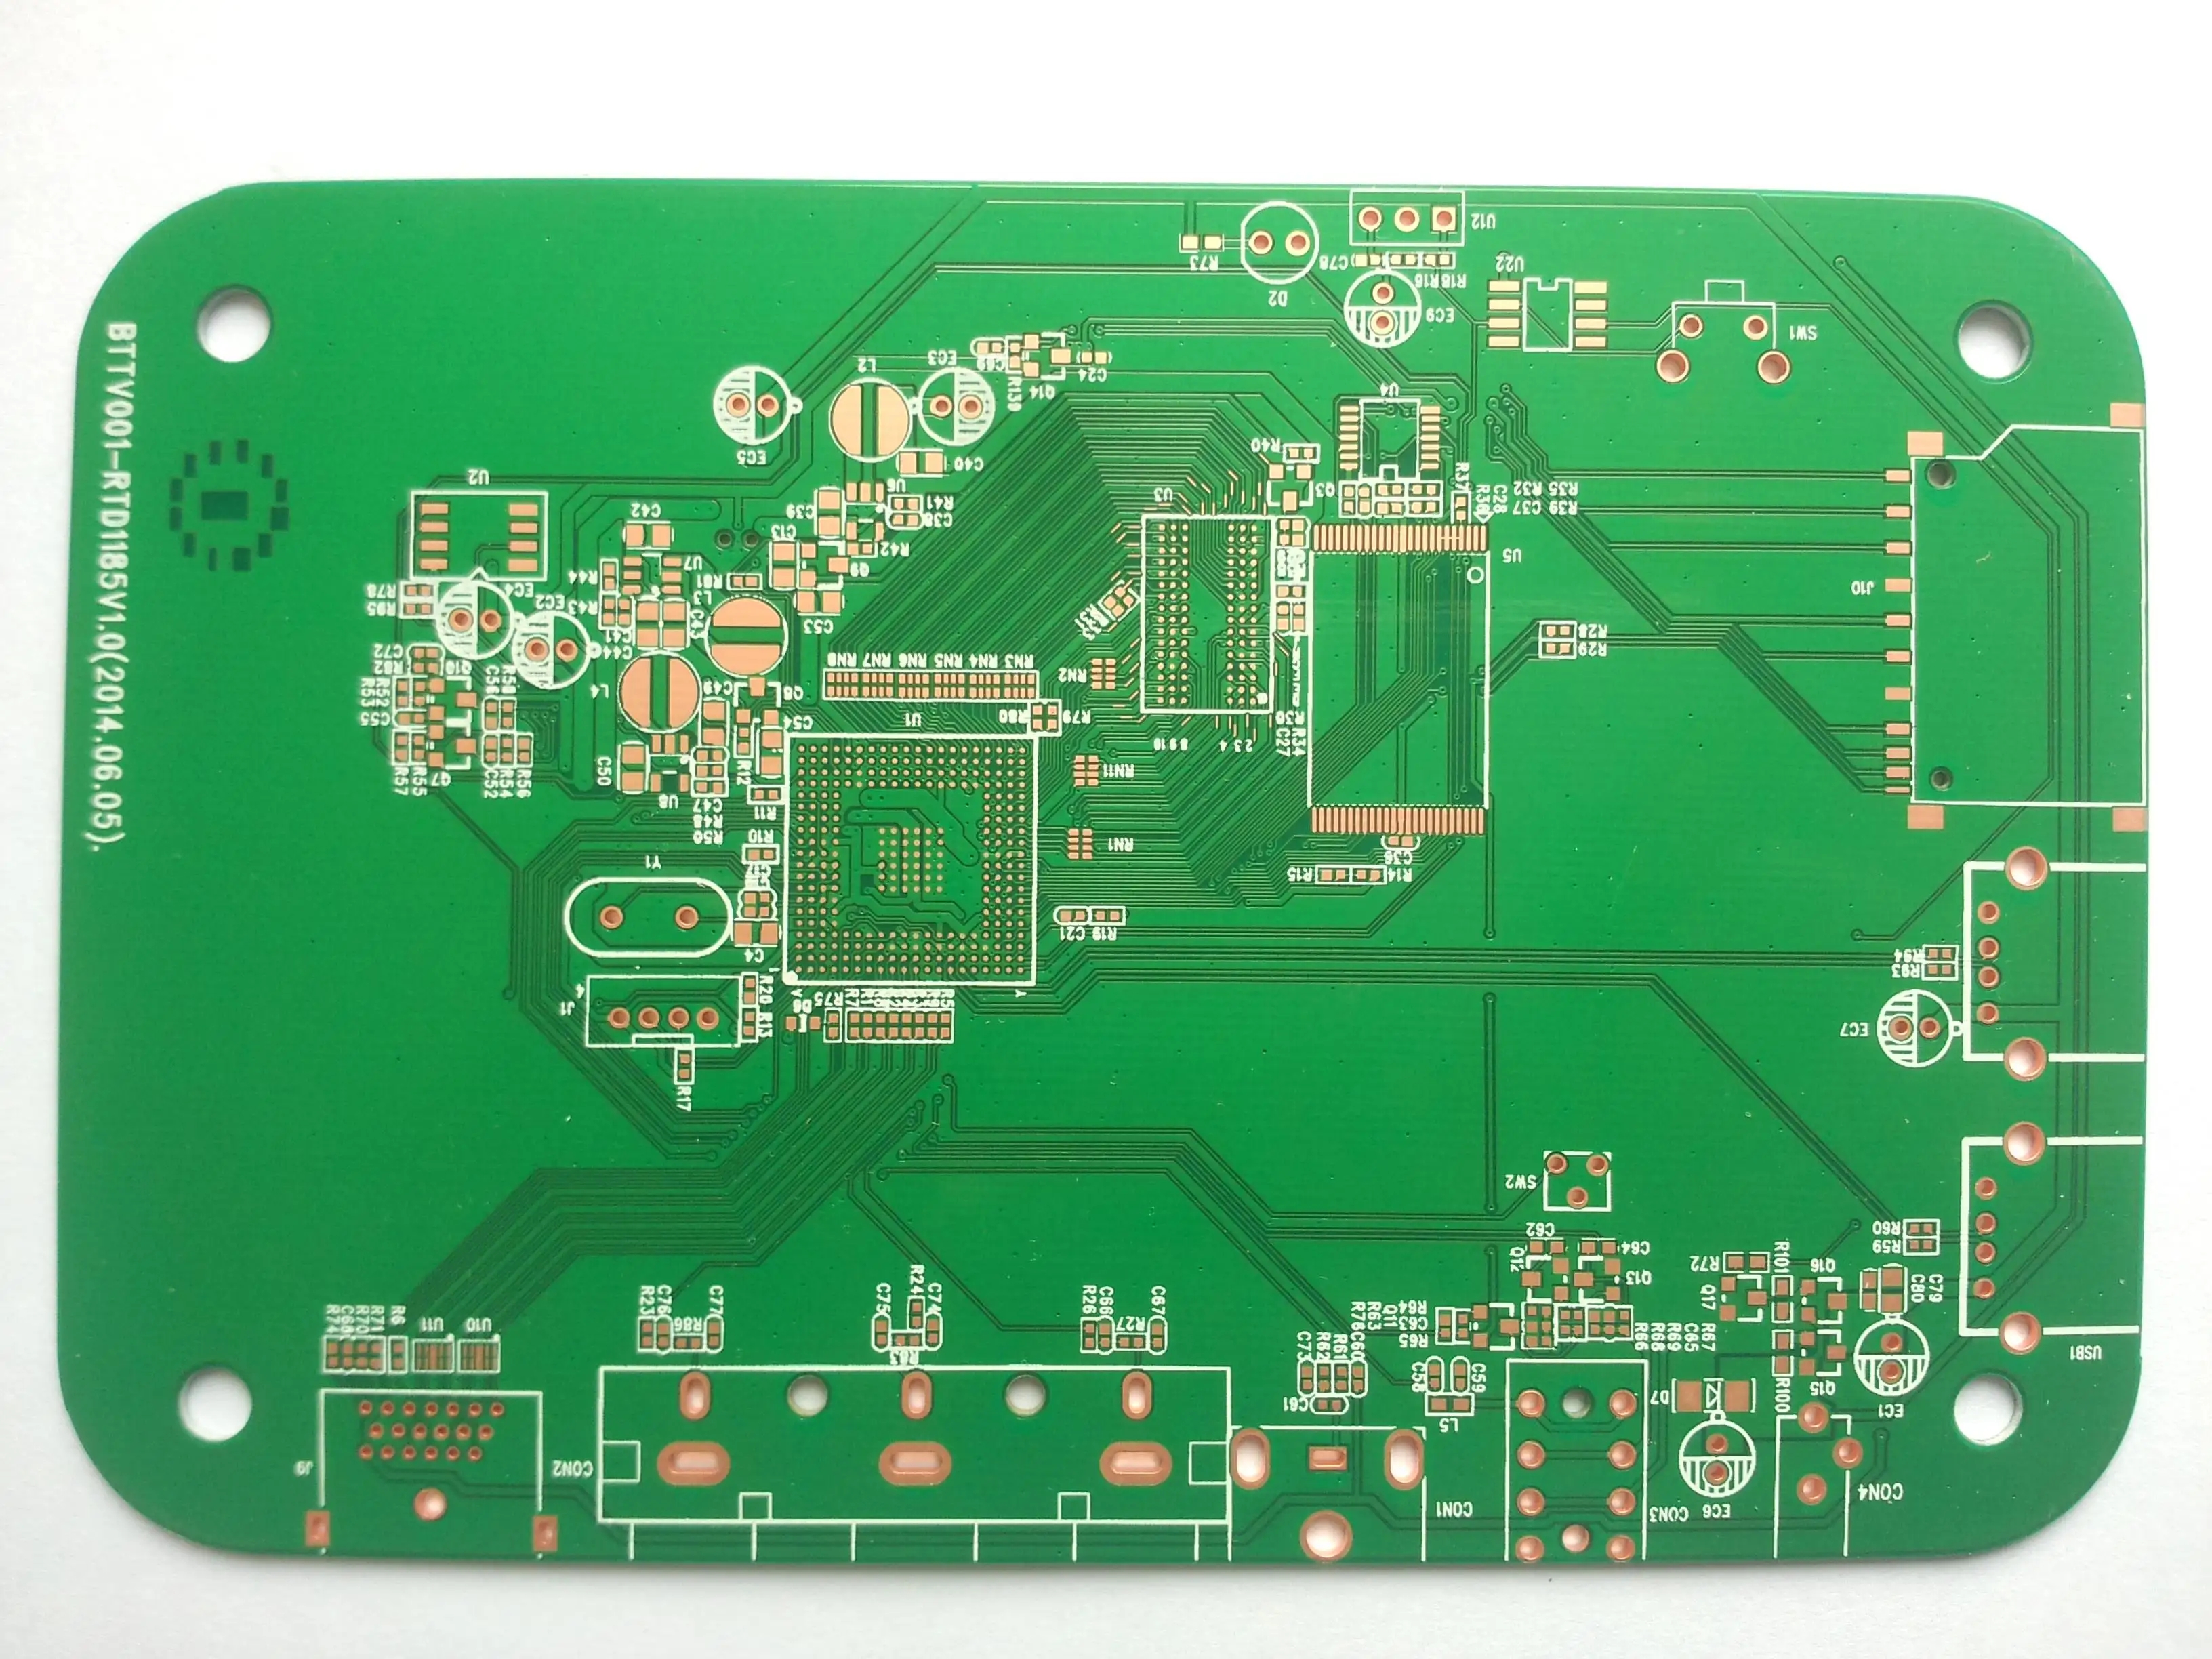 Concept of pcb board reading and detailed explanation of components